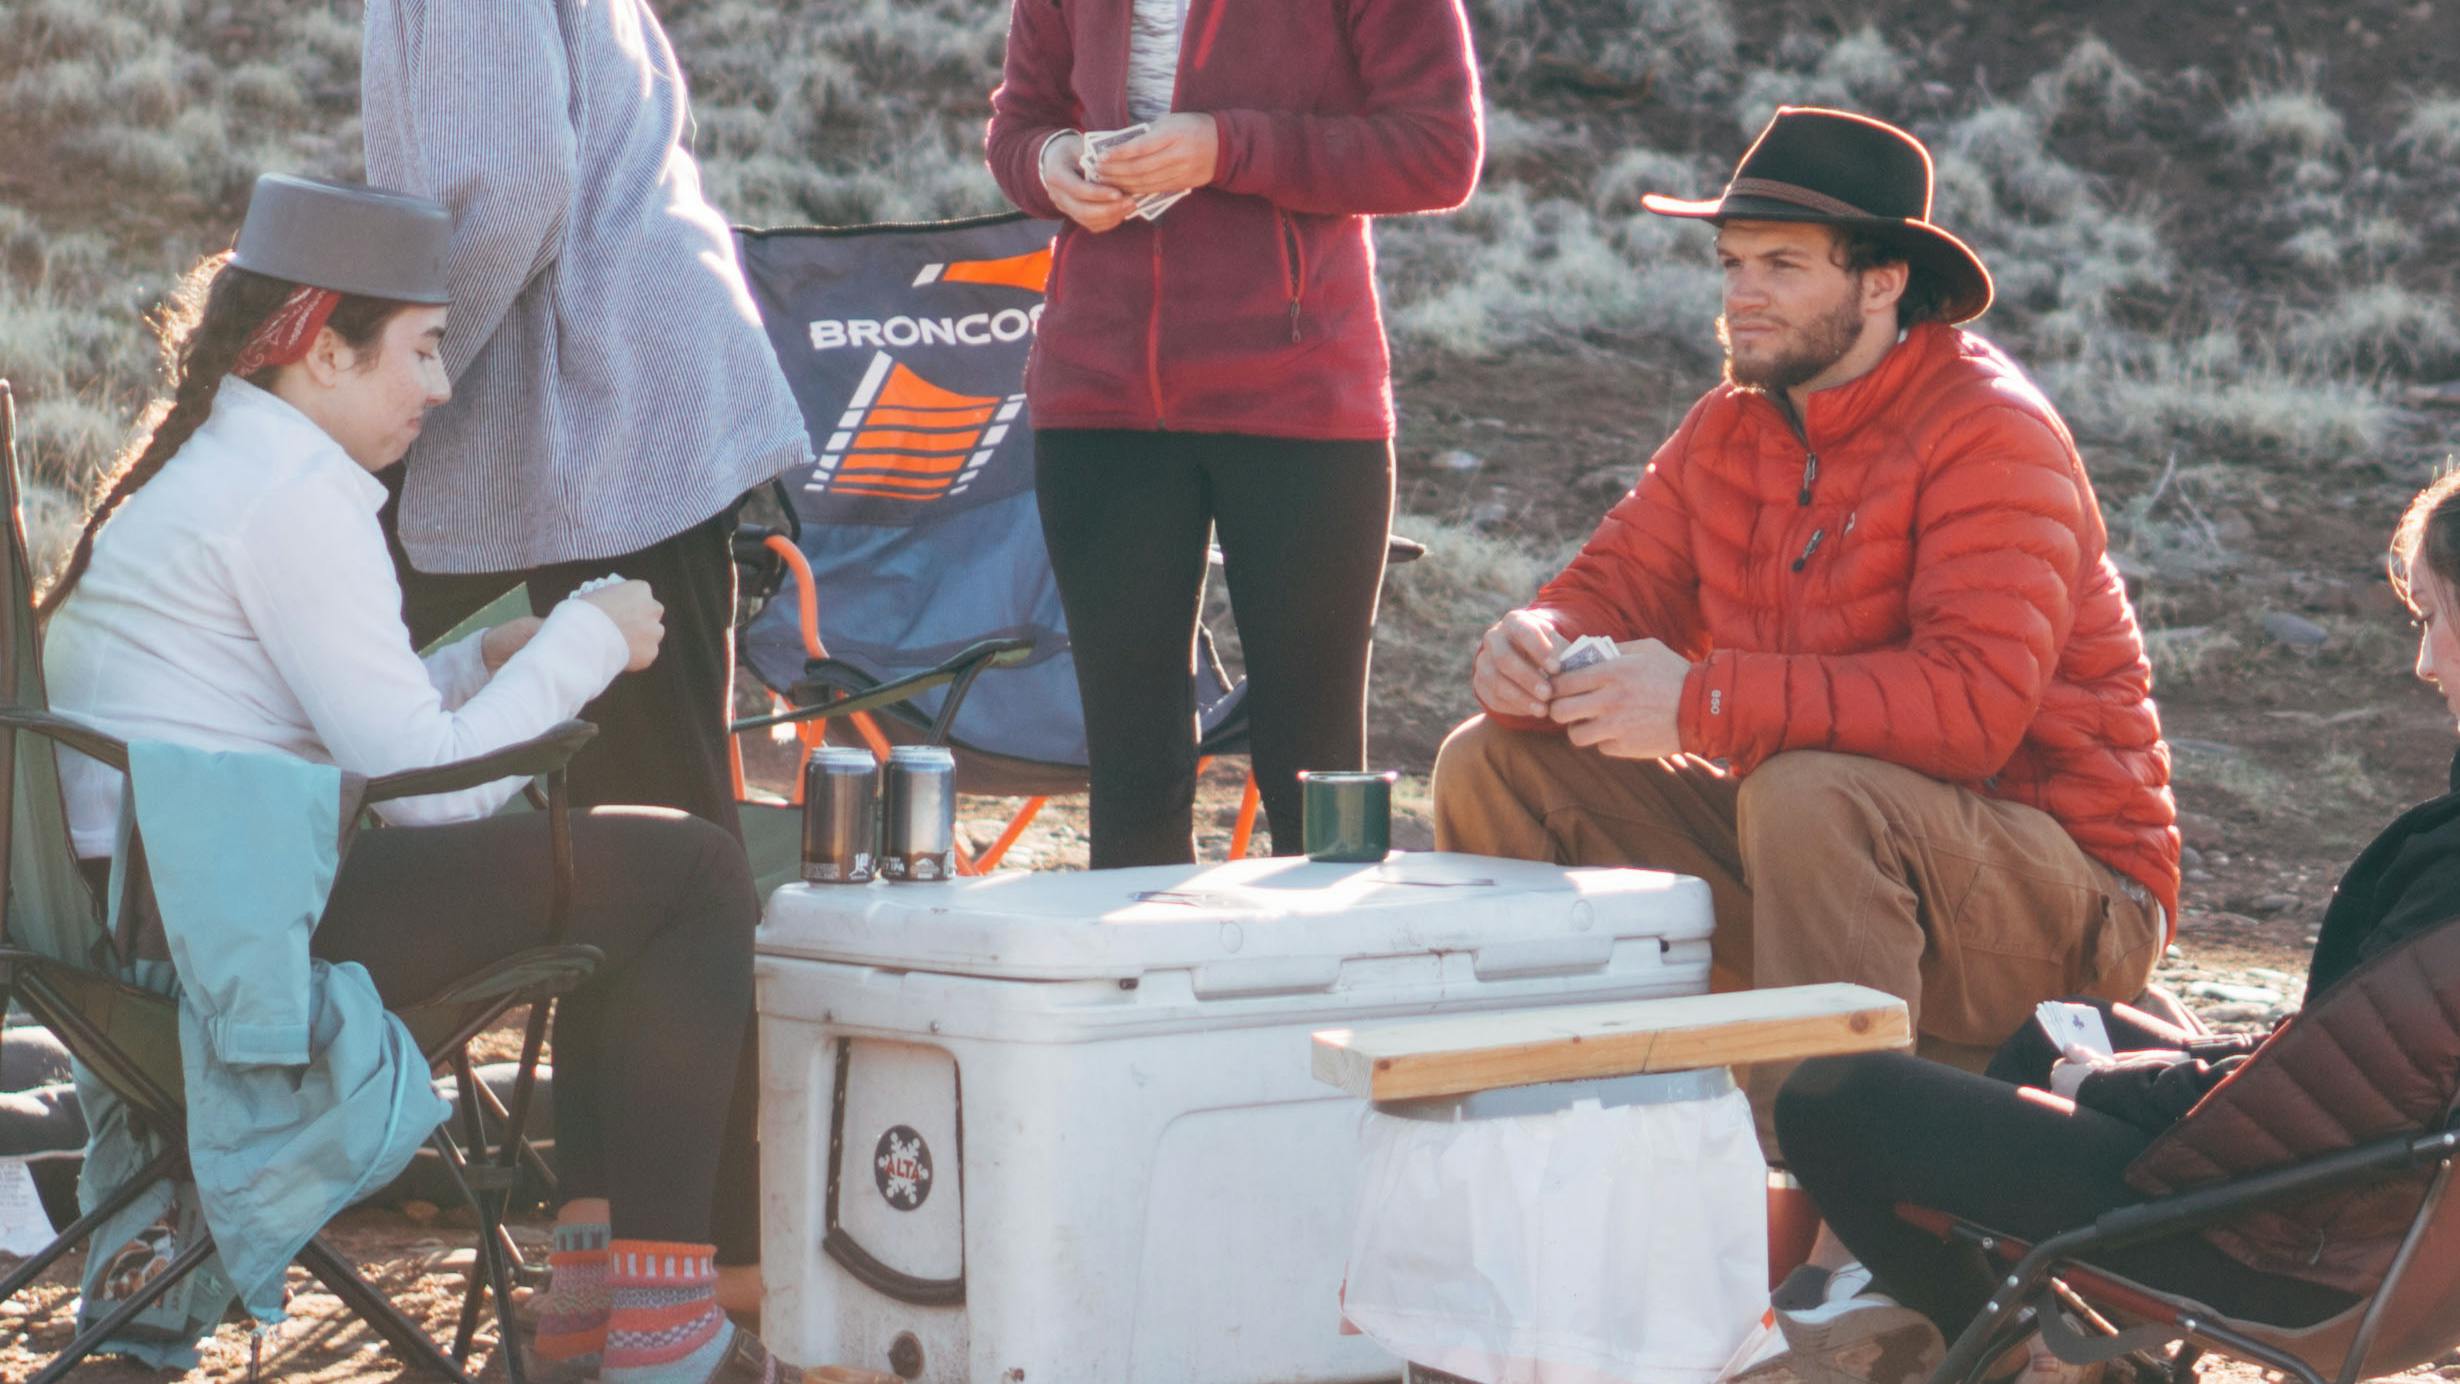 Five people sitting around a cooler while camping.